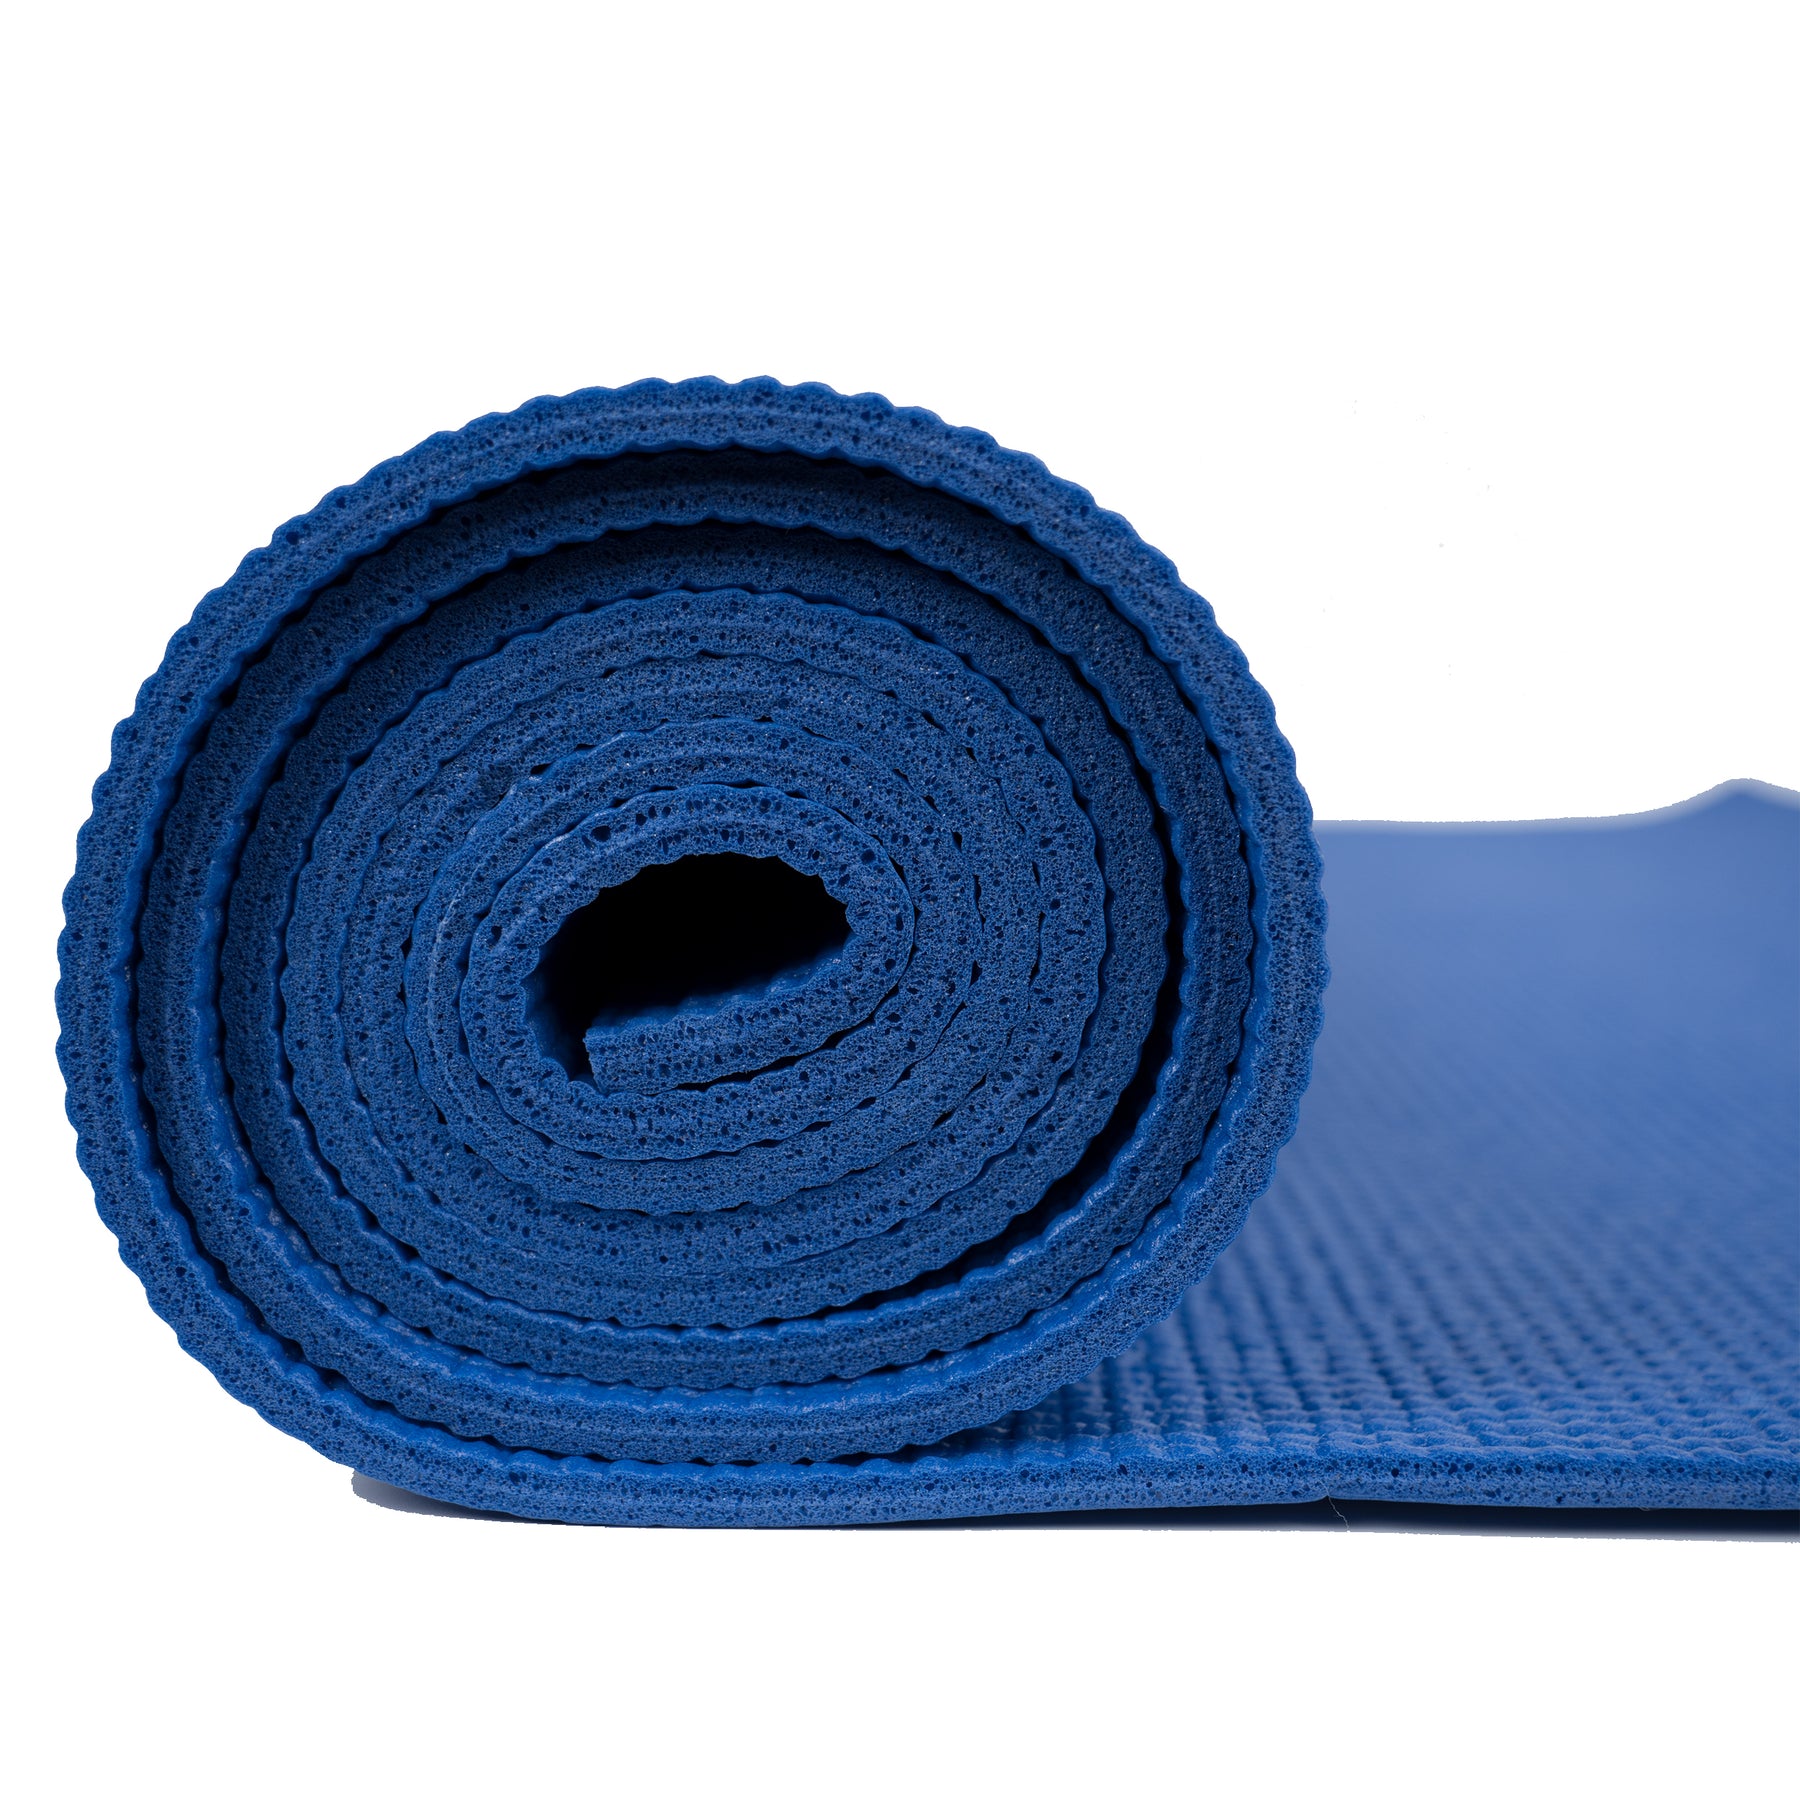 Dominion Care Anti Skid Yoga Mat 6mm Long Size: Buy Bag of 1.0